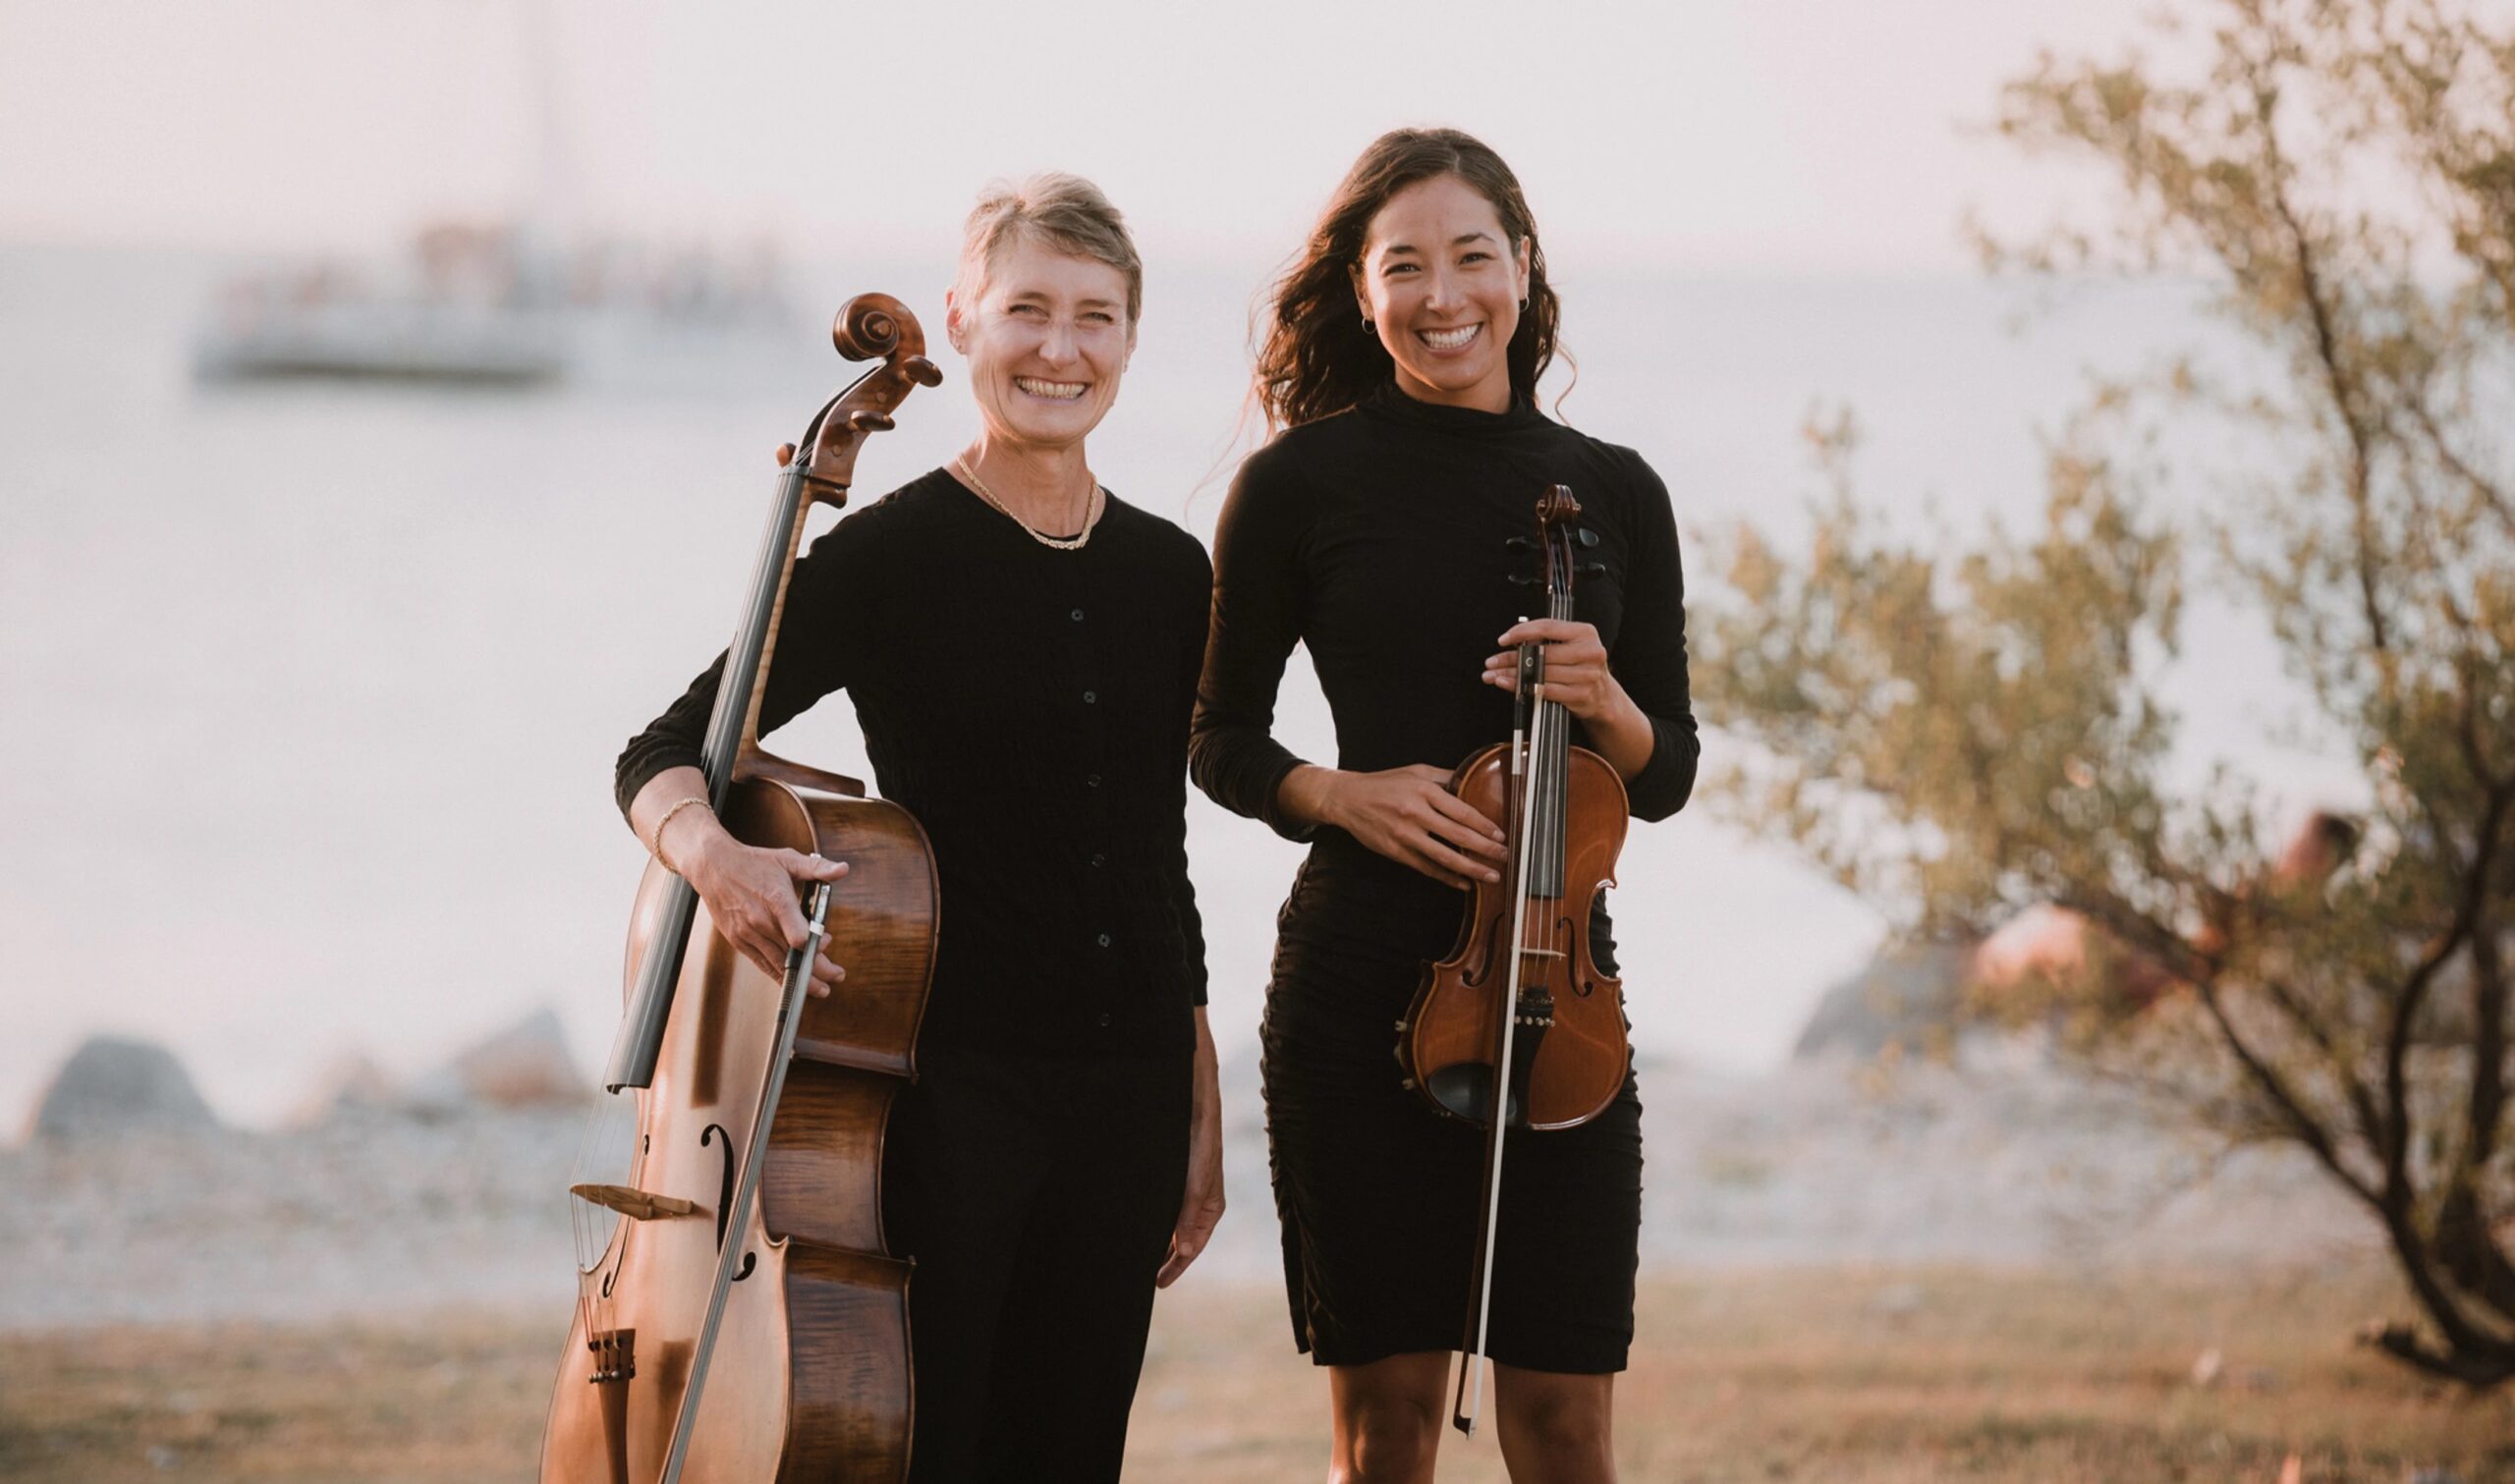 The Art of the String with Key West Duo